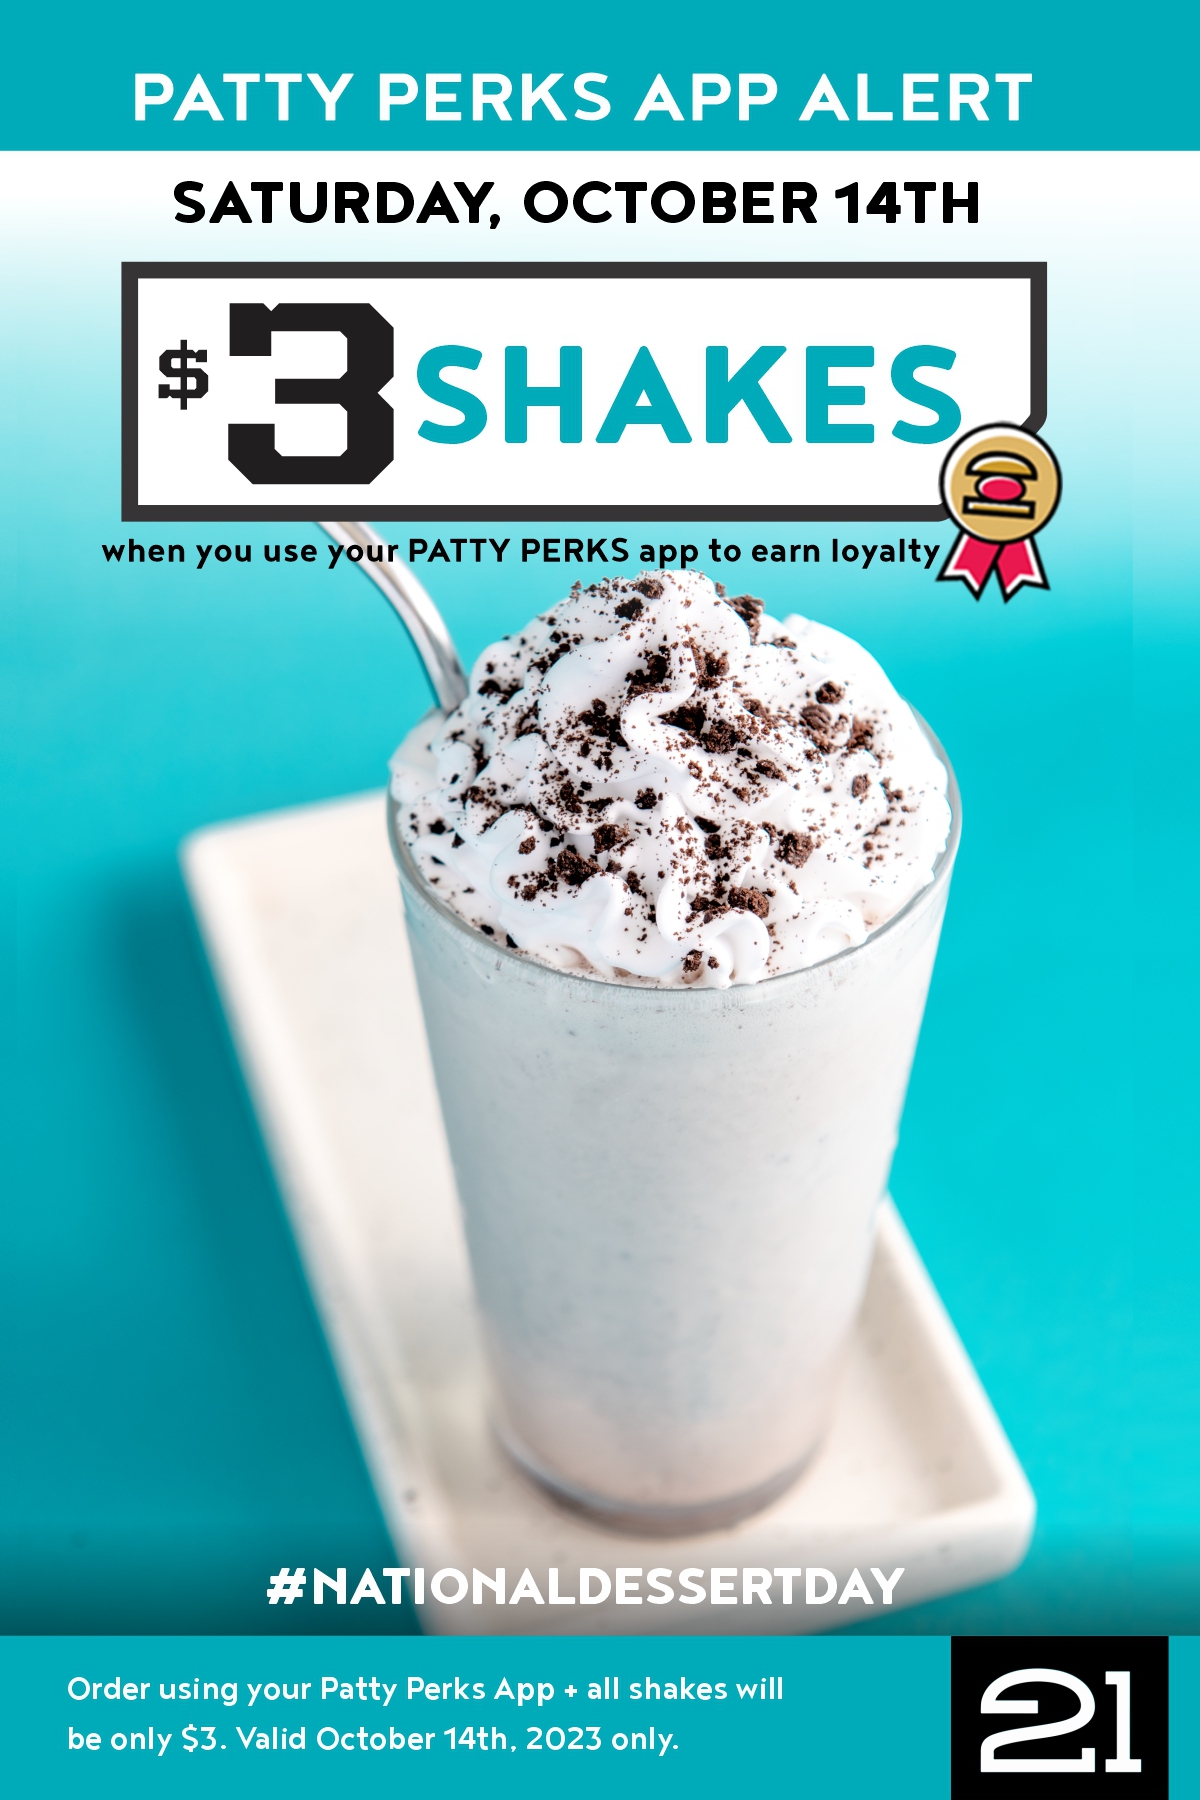 October 14 is National Dessert day, celebrate with $3 shakes.